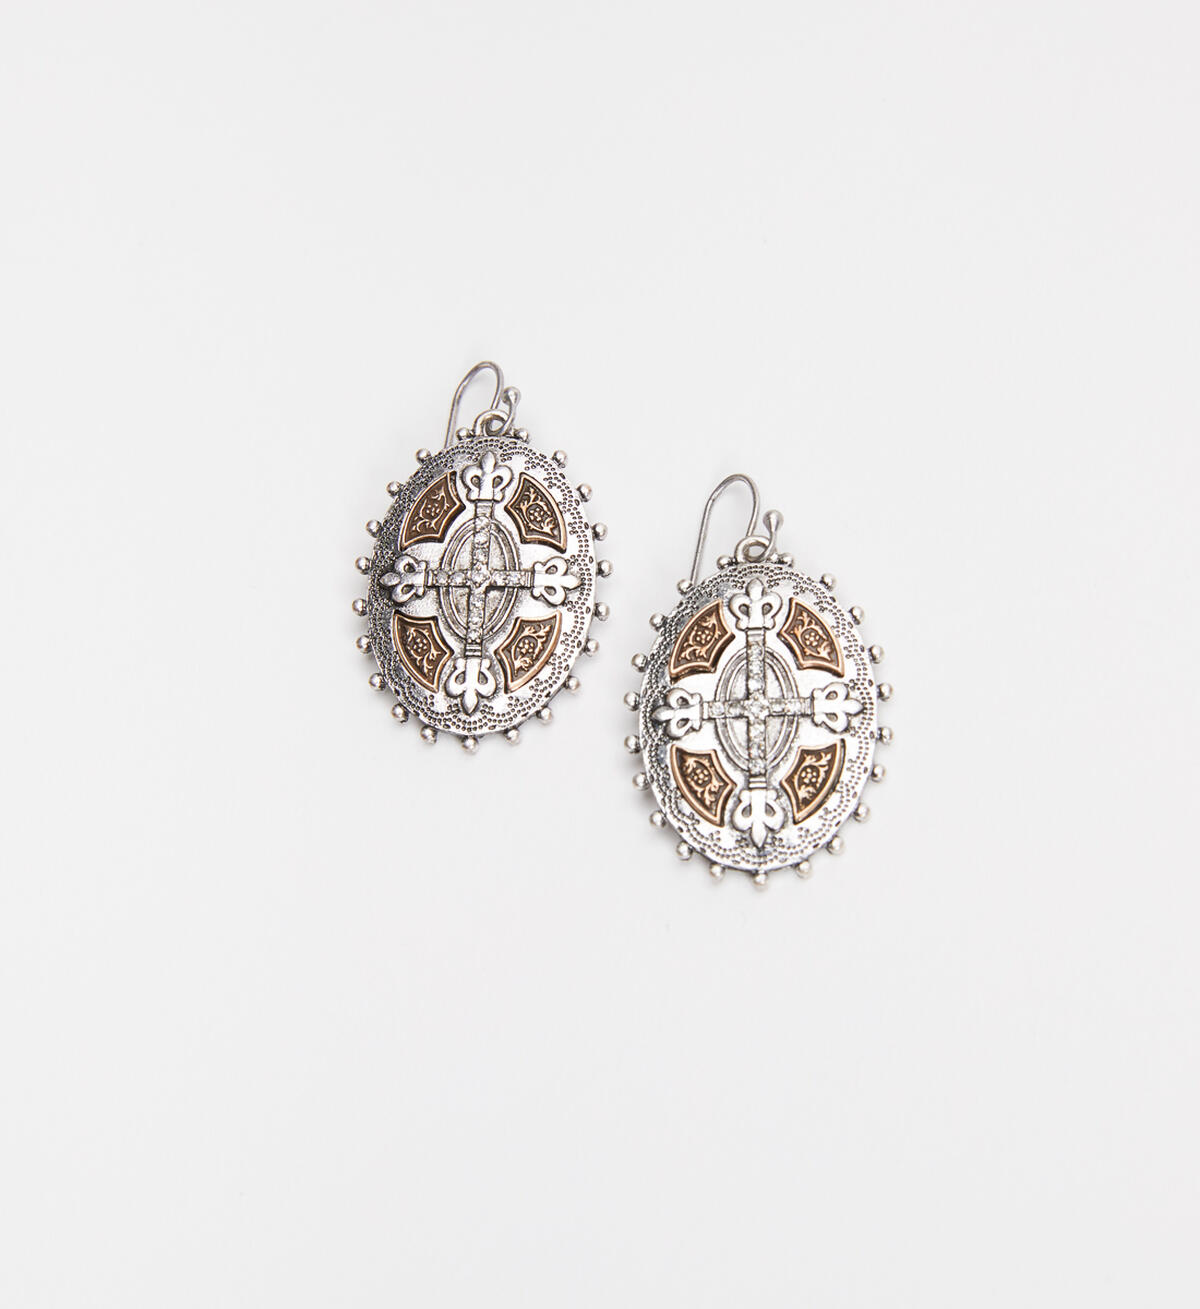 Silver-Tone Oval Drop Earrings, , hi-res image number 0